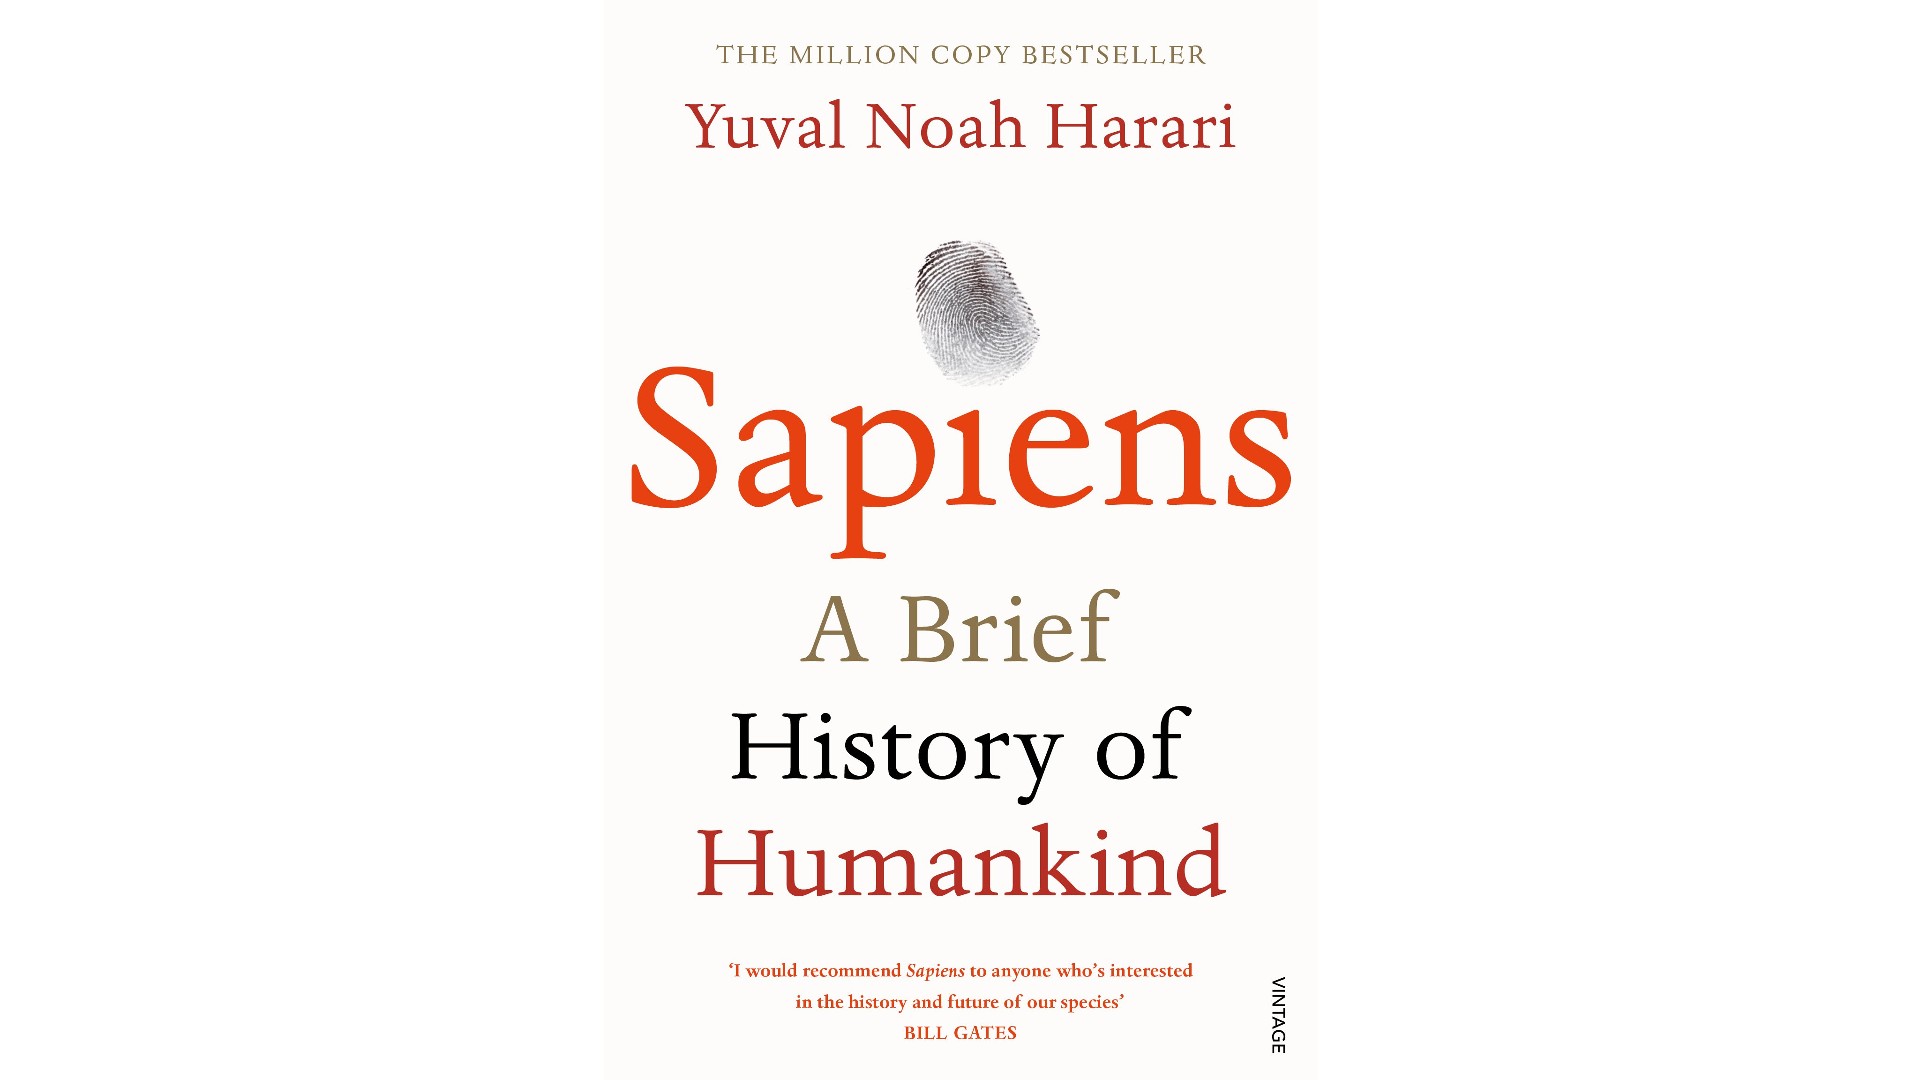 Book cover of Sapiens: A Brief History of Humankind by Yuval Noah Harari